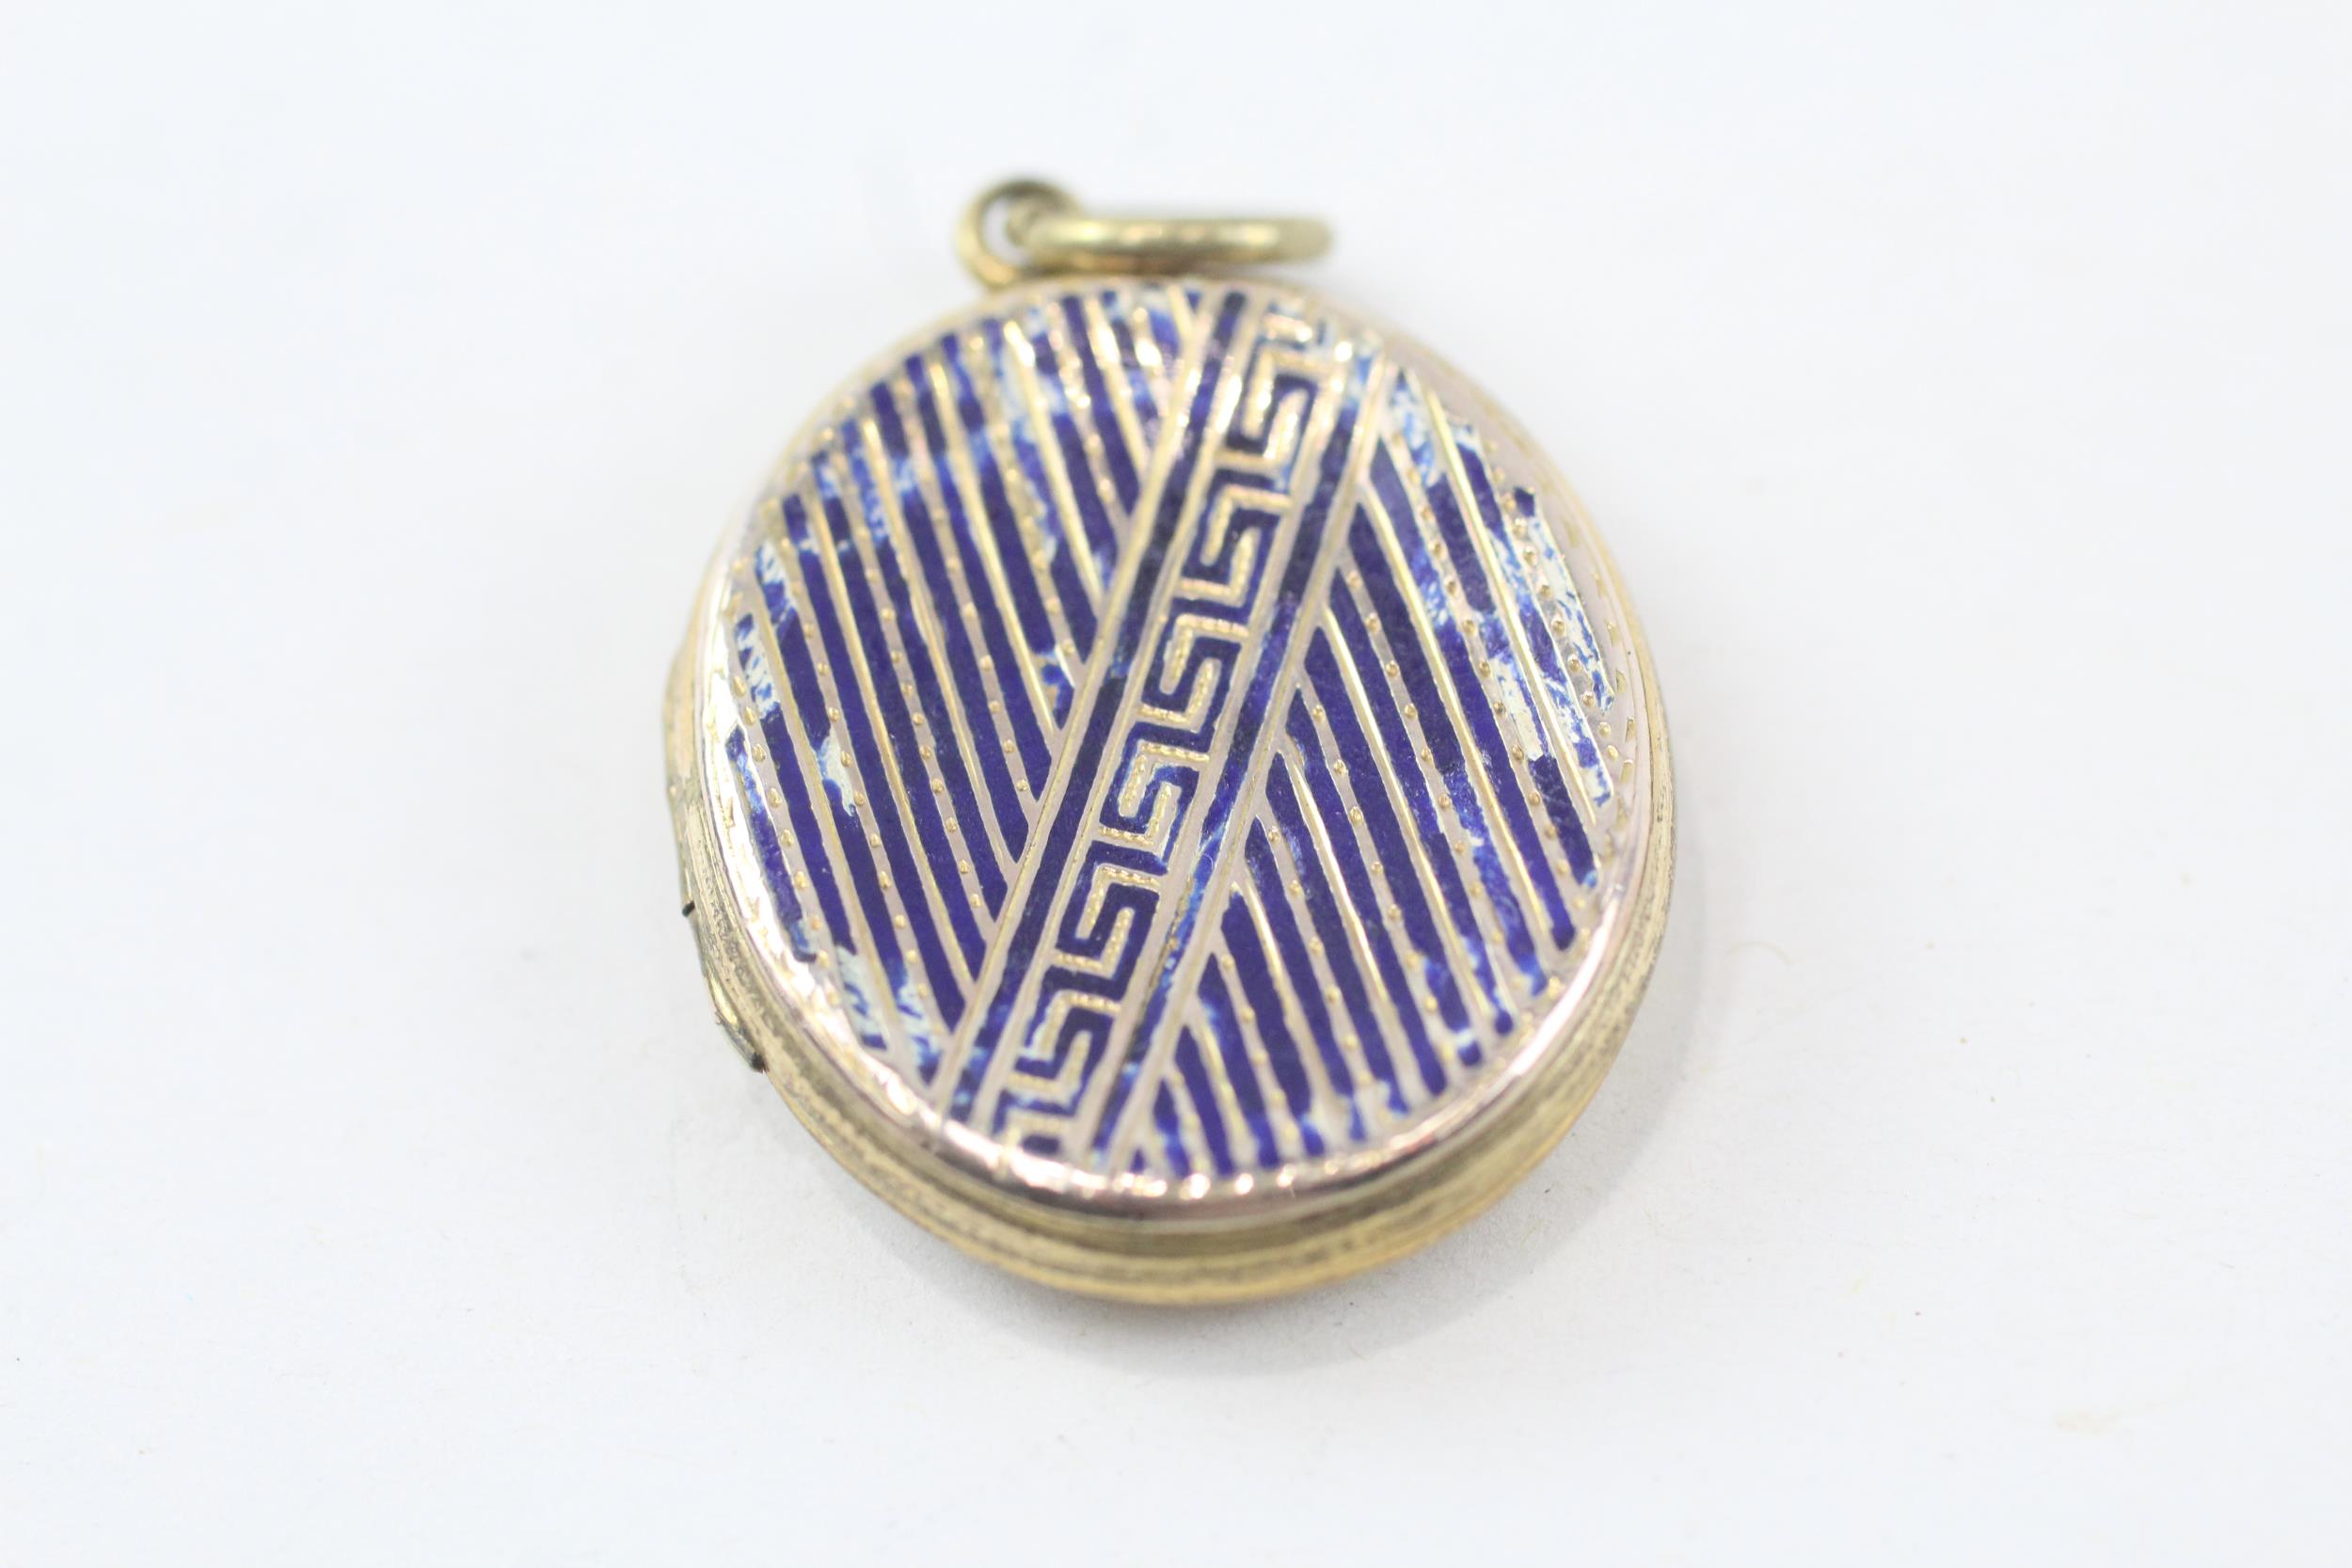 2x 9ct gold back & front locket pendants with buckle & enamel detail (15.9g) - Image 3 of 5